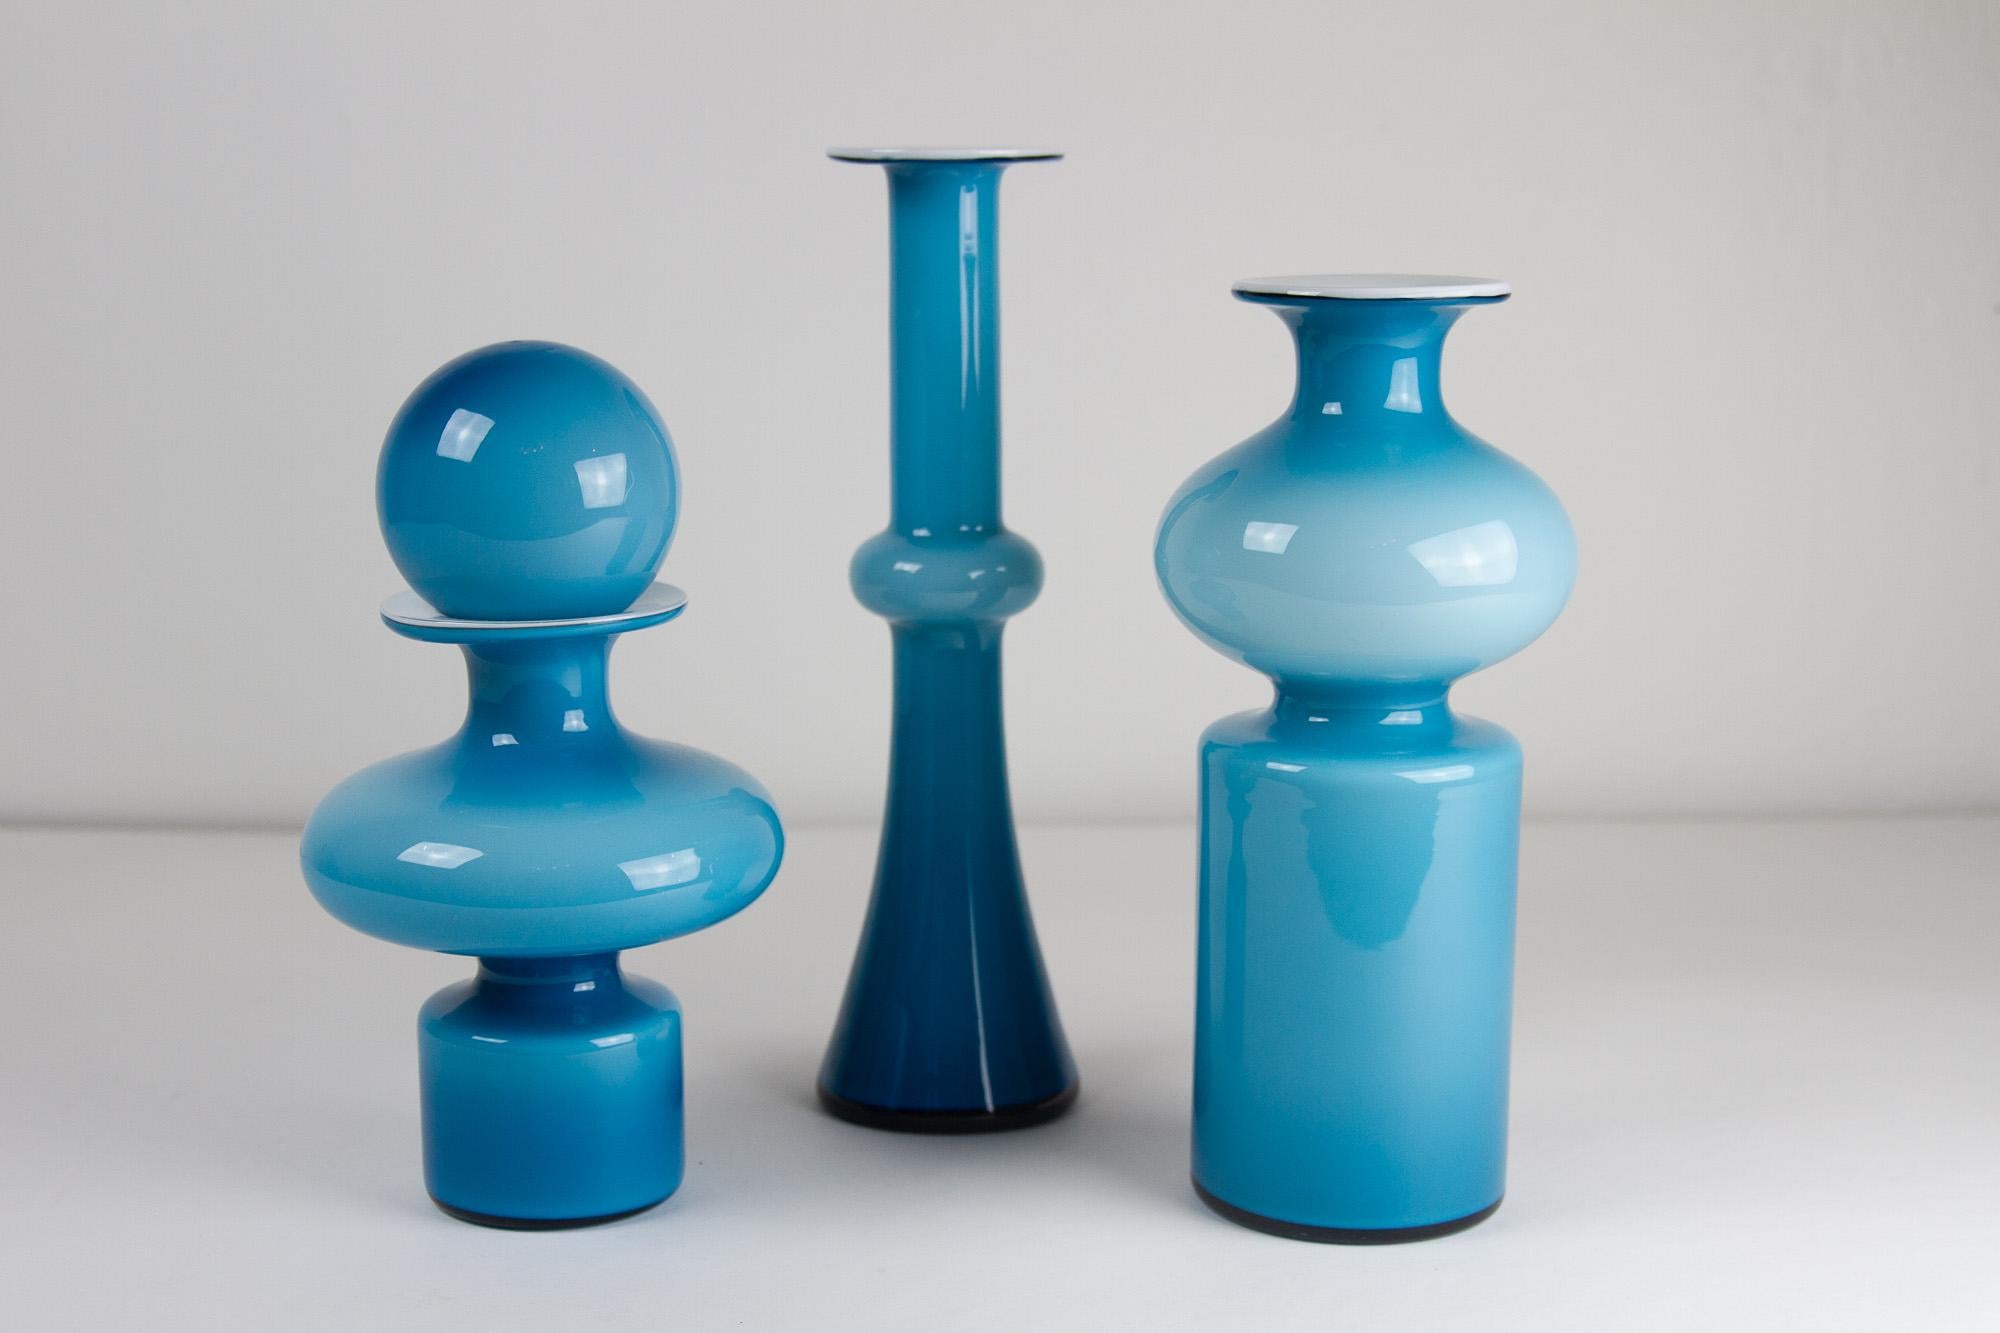 Vintage Danish Carnaby Vases by Per Lütken for Holmegaard 1960s. Set of 3.
Danish modern set of hand blown glass vases designed by Per Lütken for Kastrup-Holmegaard, Denmark. Only manufactured from 1968 to 1976.
Opaline with blue overlay.

This